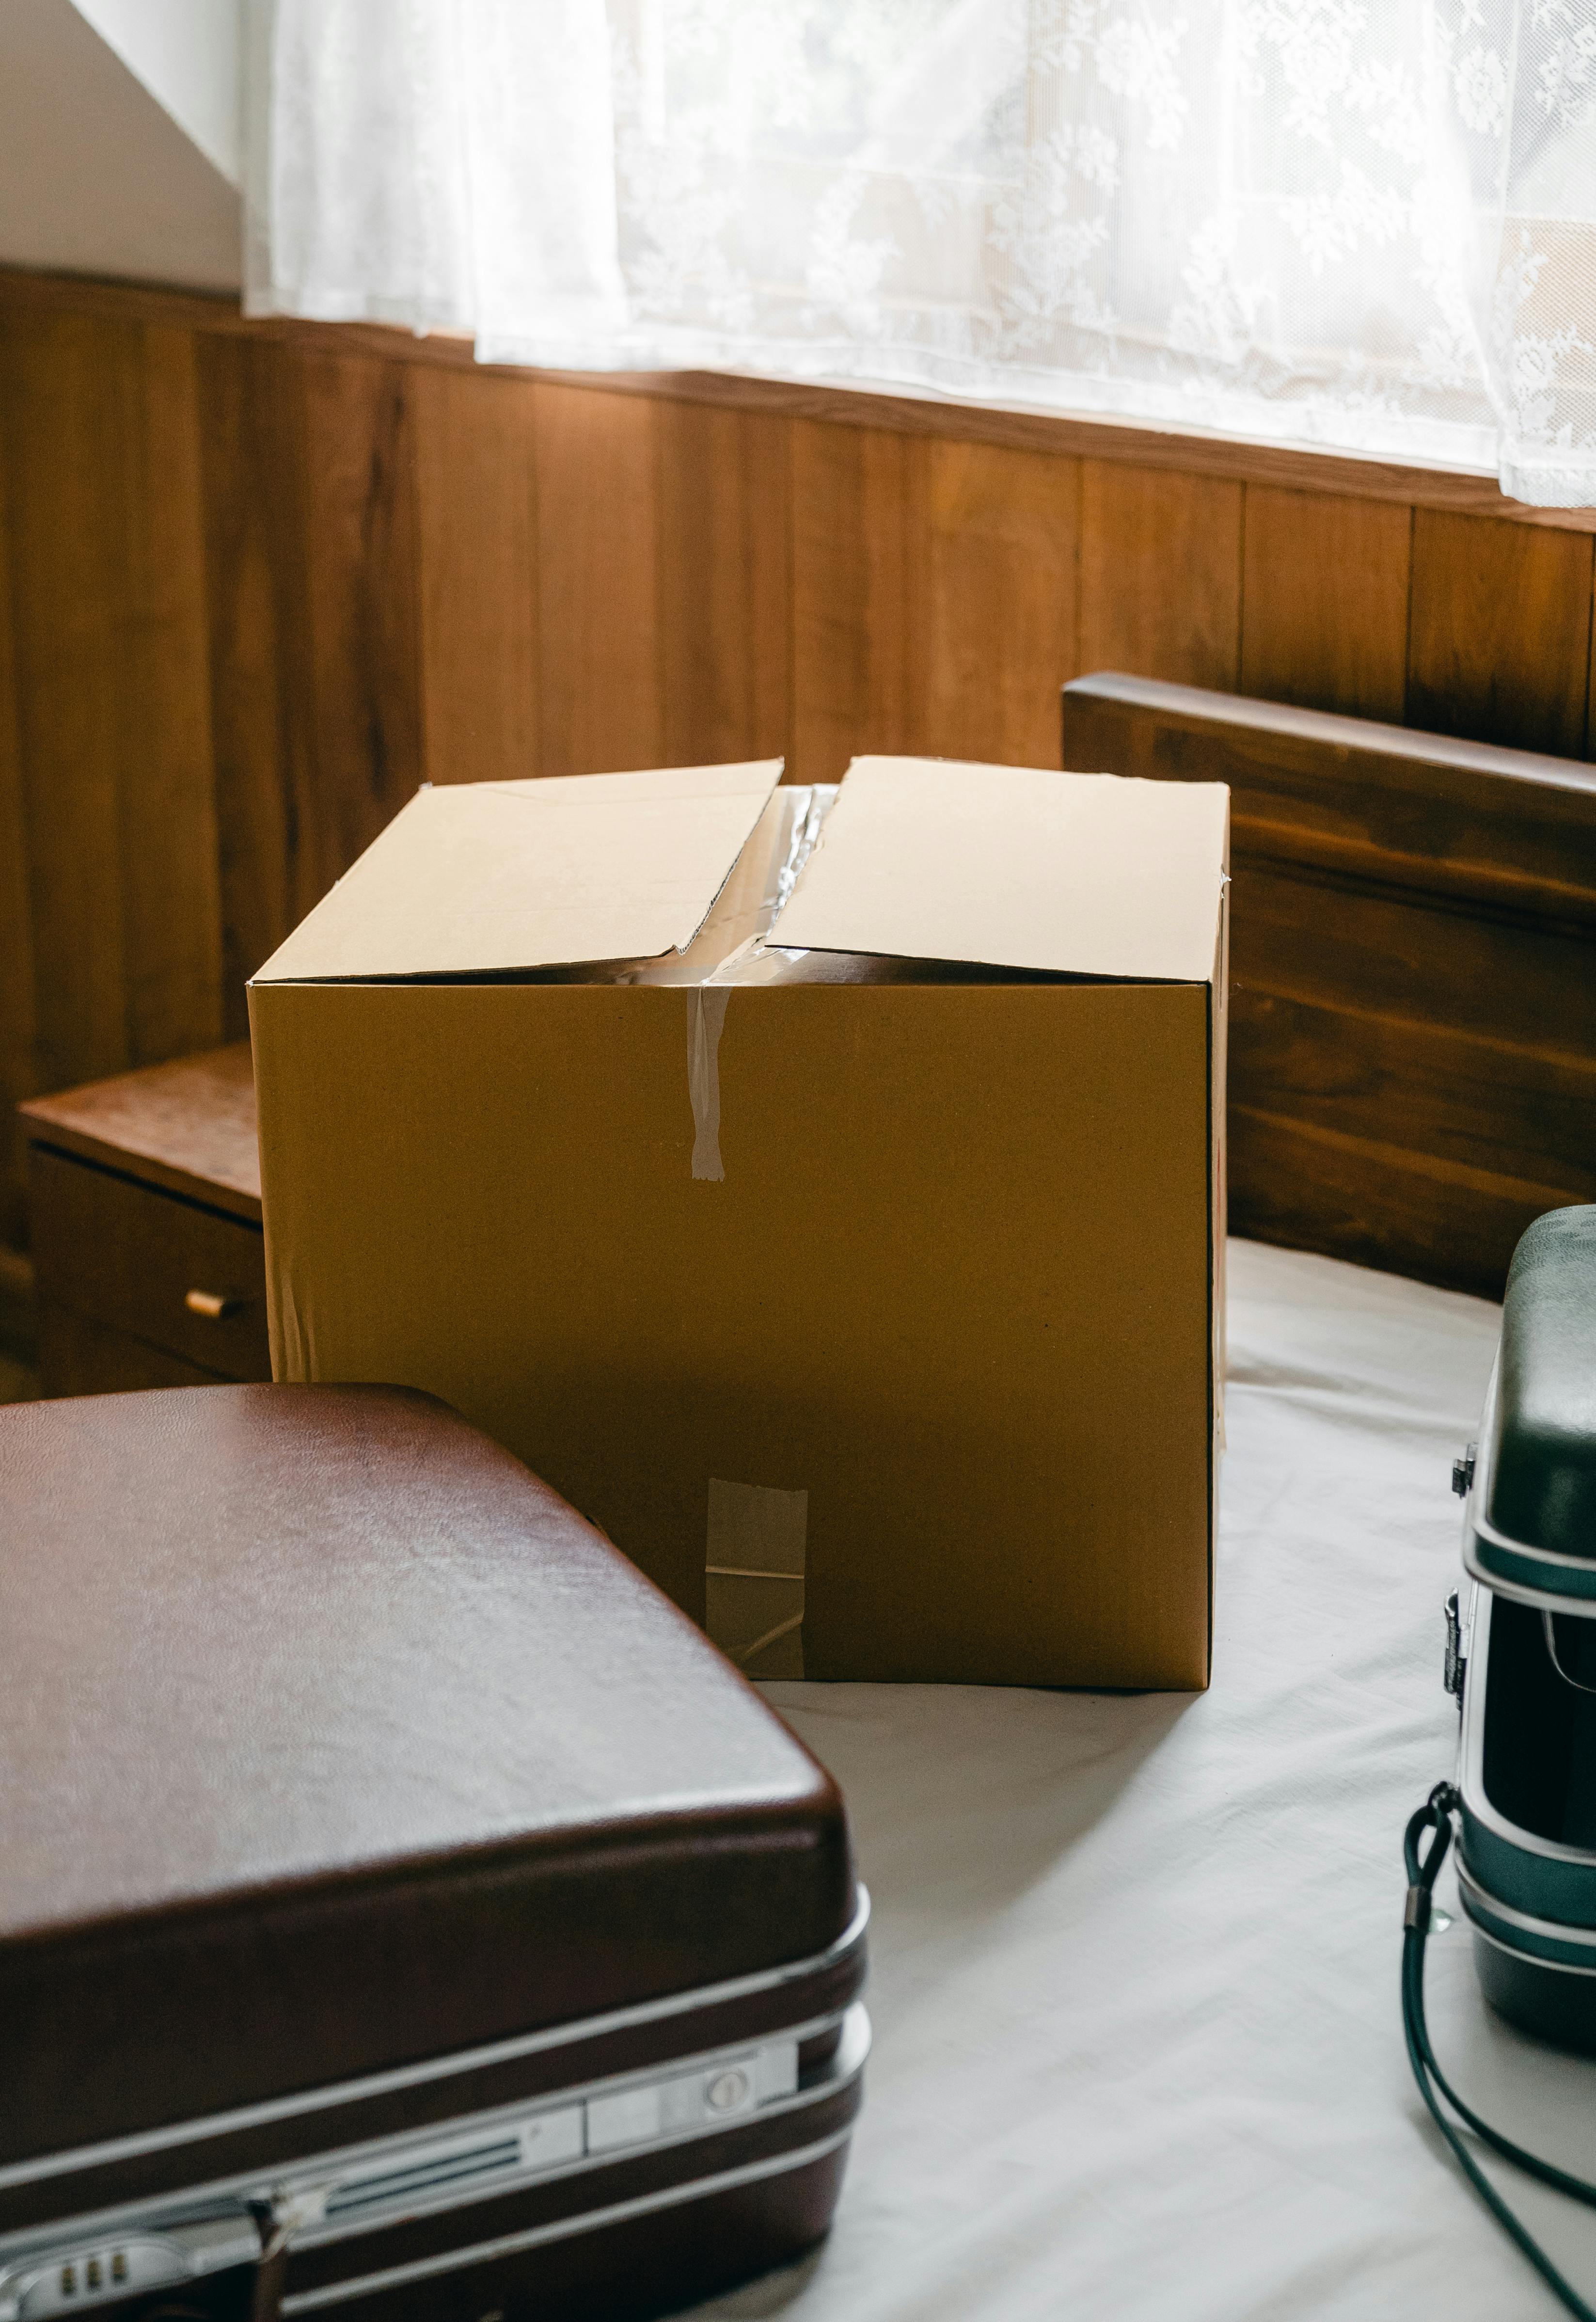 An old box and suitcase | Source: Pexels